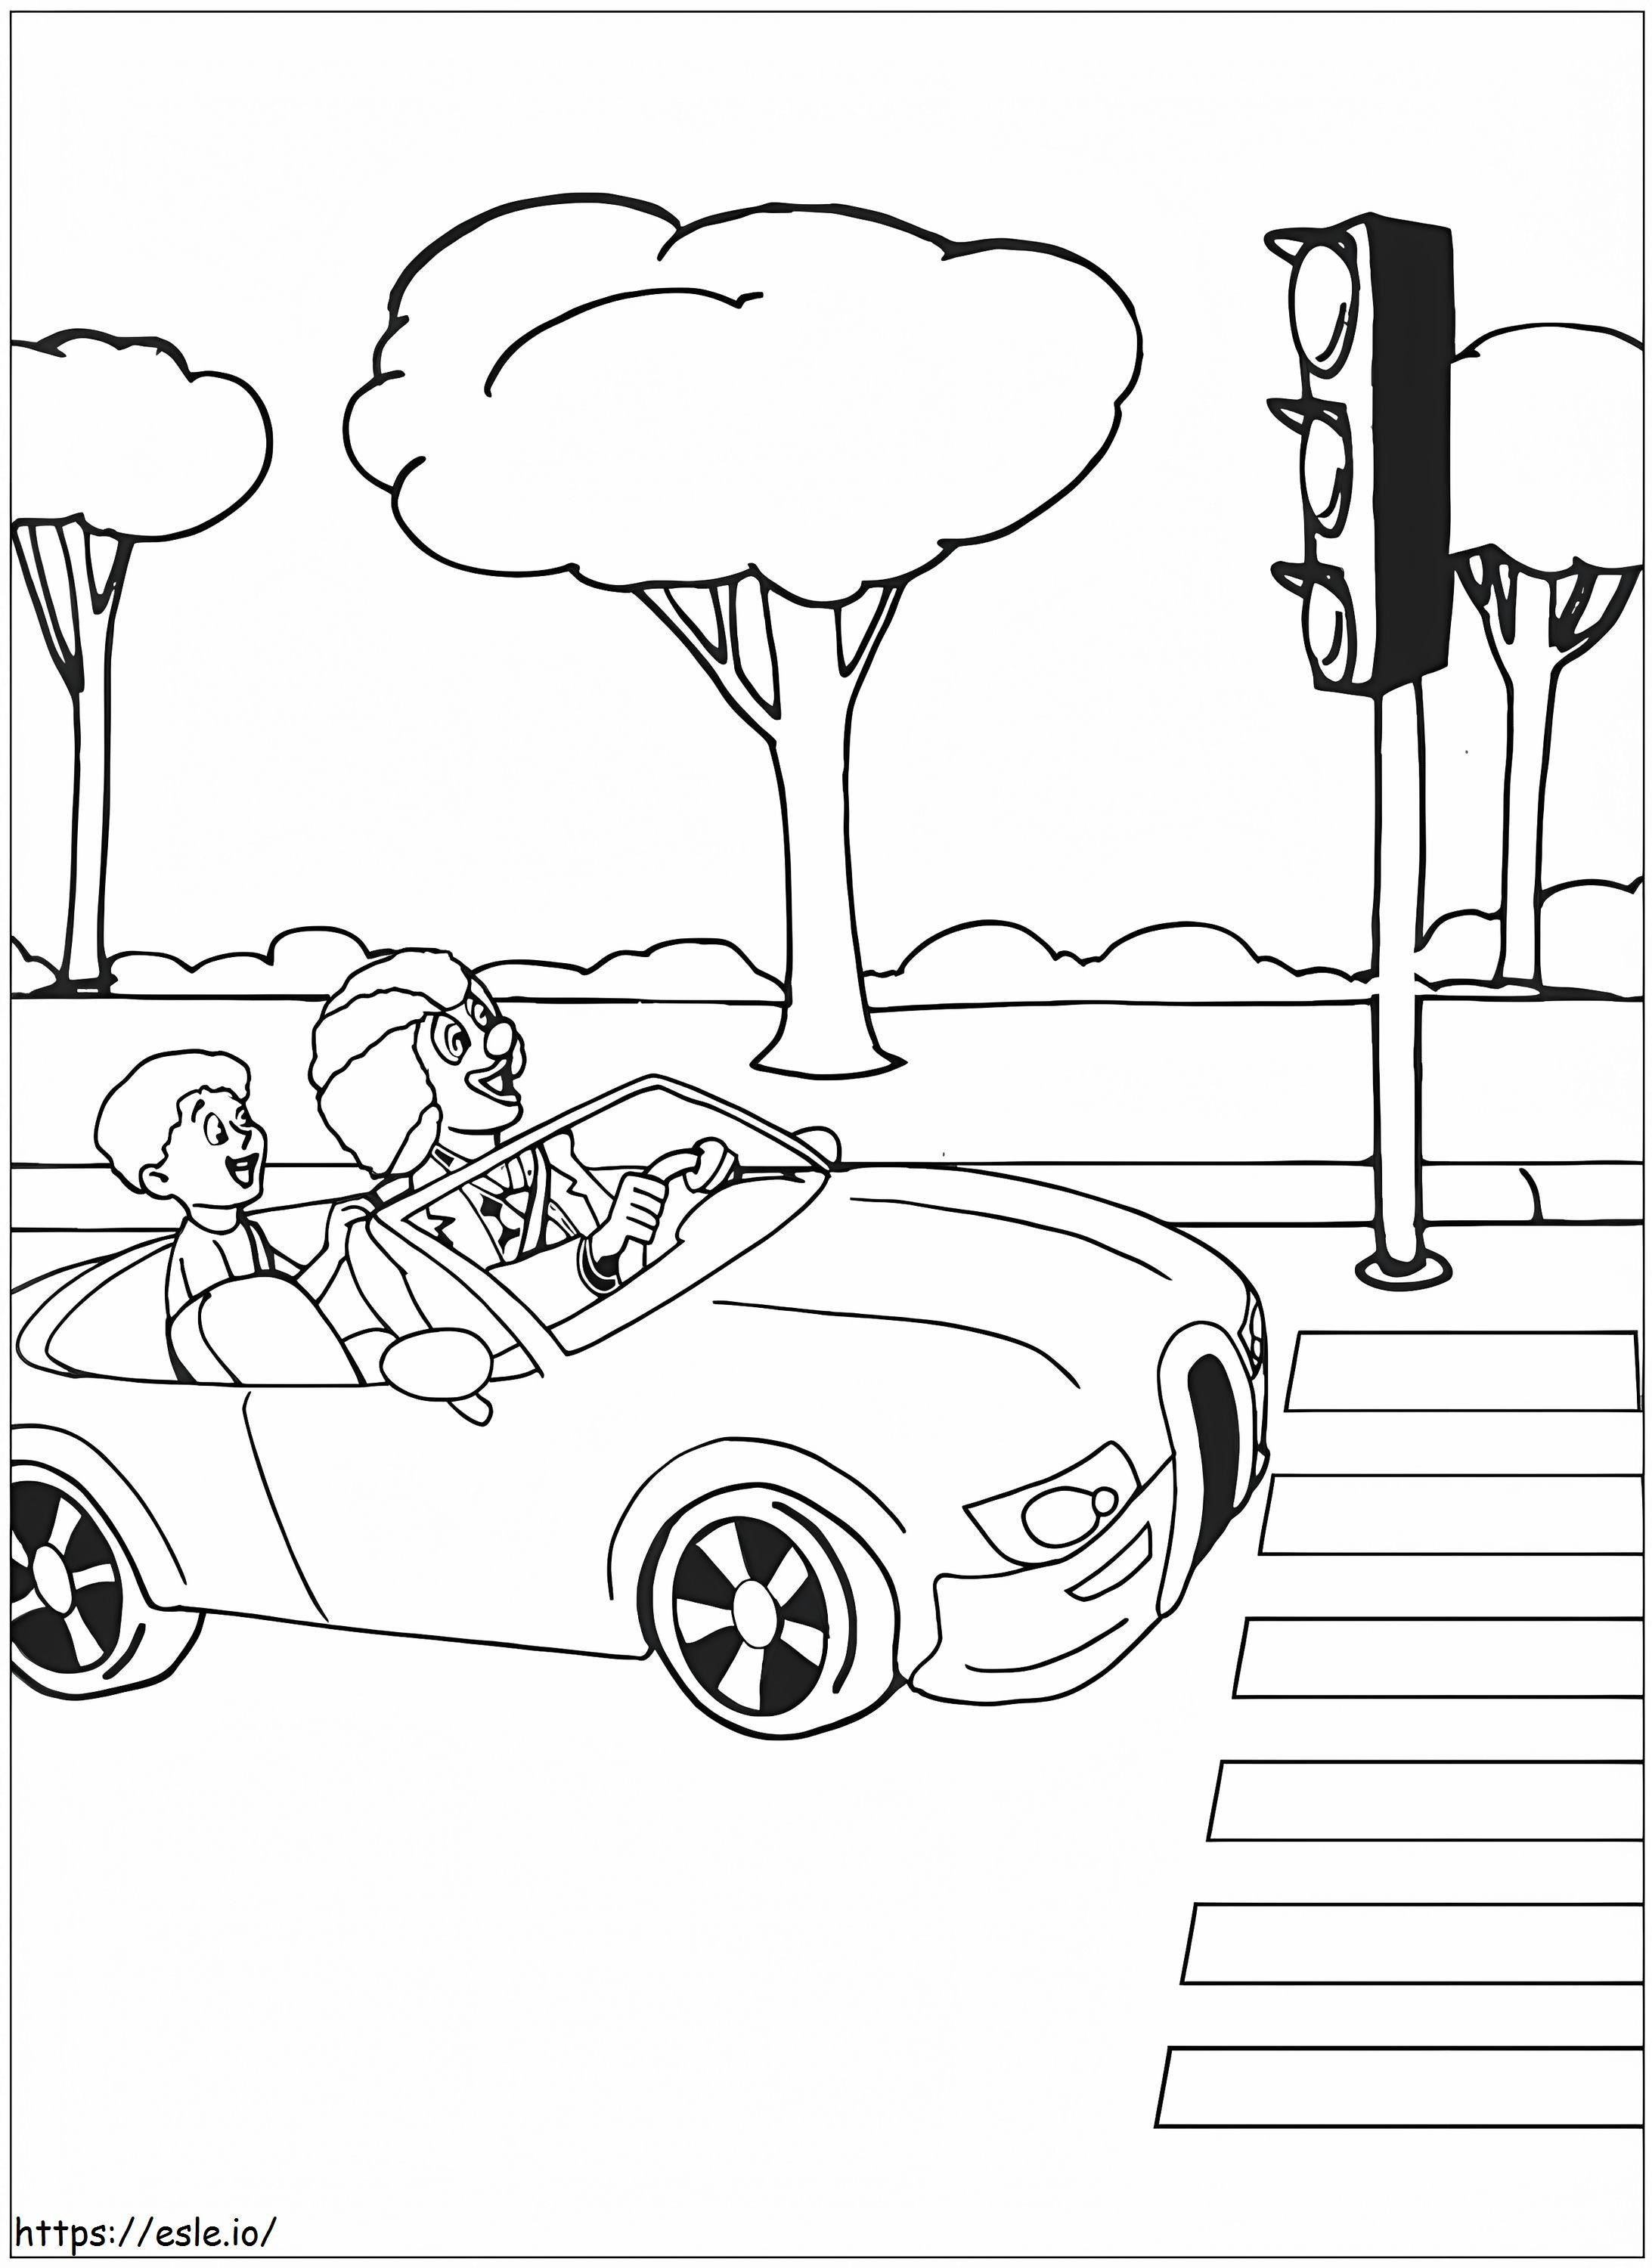 Securite Routiere 1 coloring page